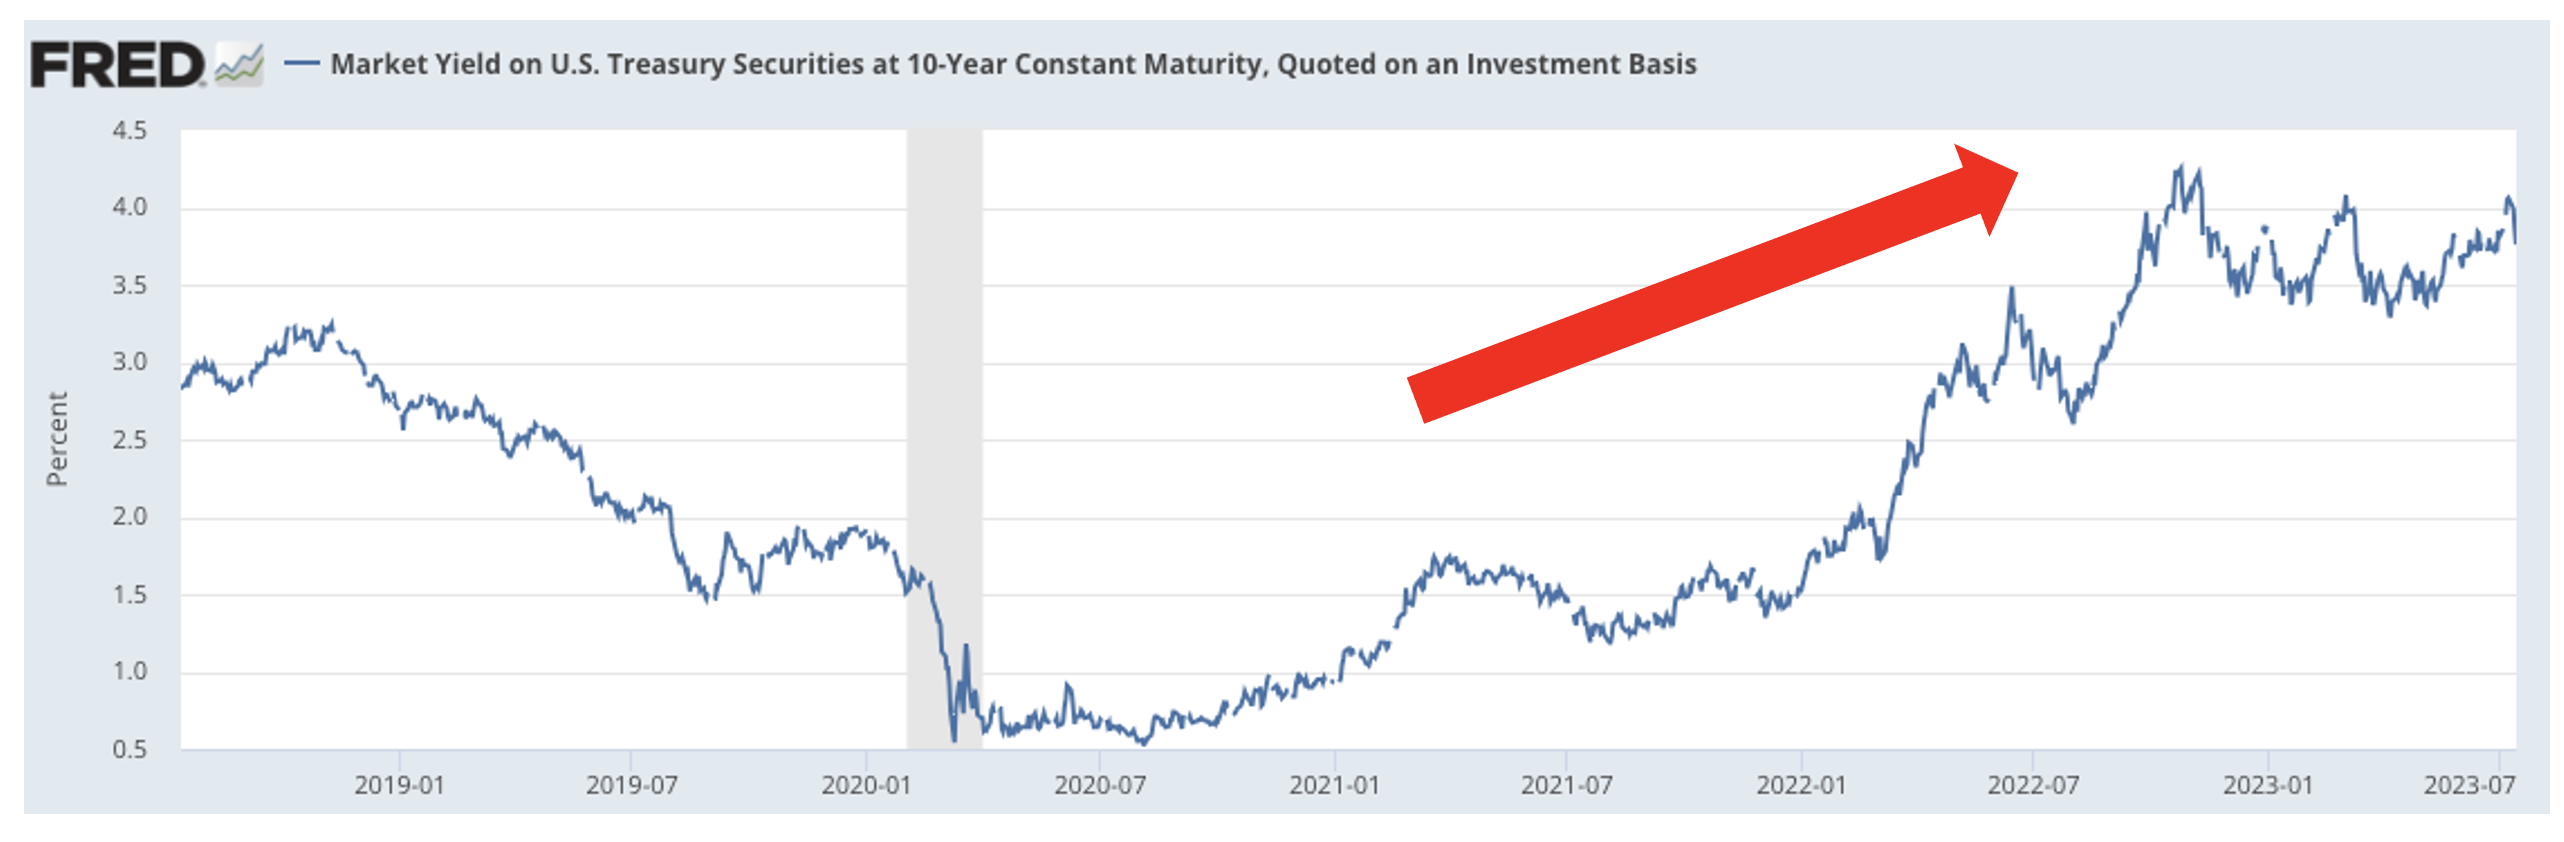  Market Yield on U.S. Treasury Securities at 10-Year Constant Maturity, Quoted on an Investment Basis (DGS10) 